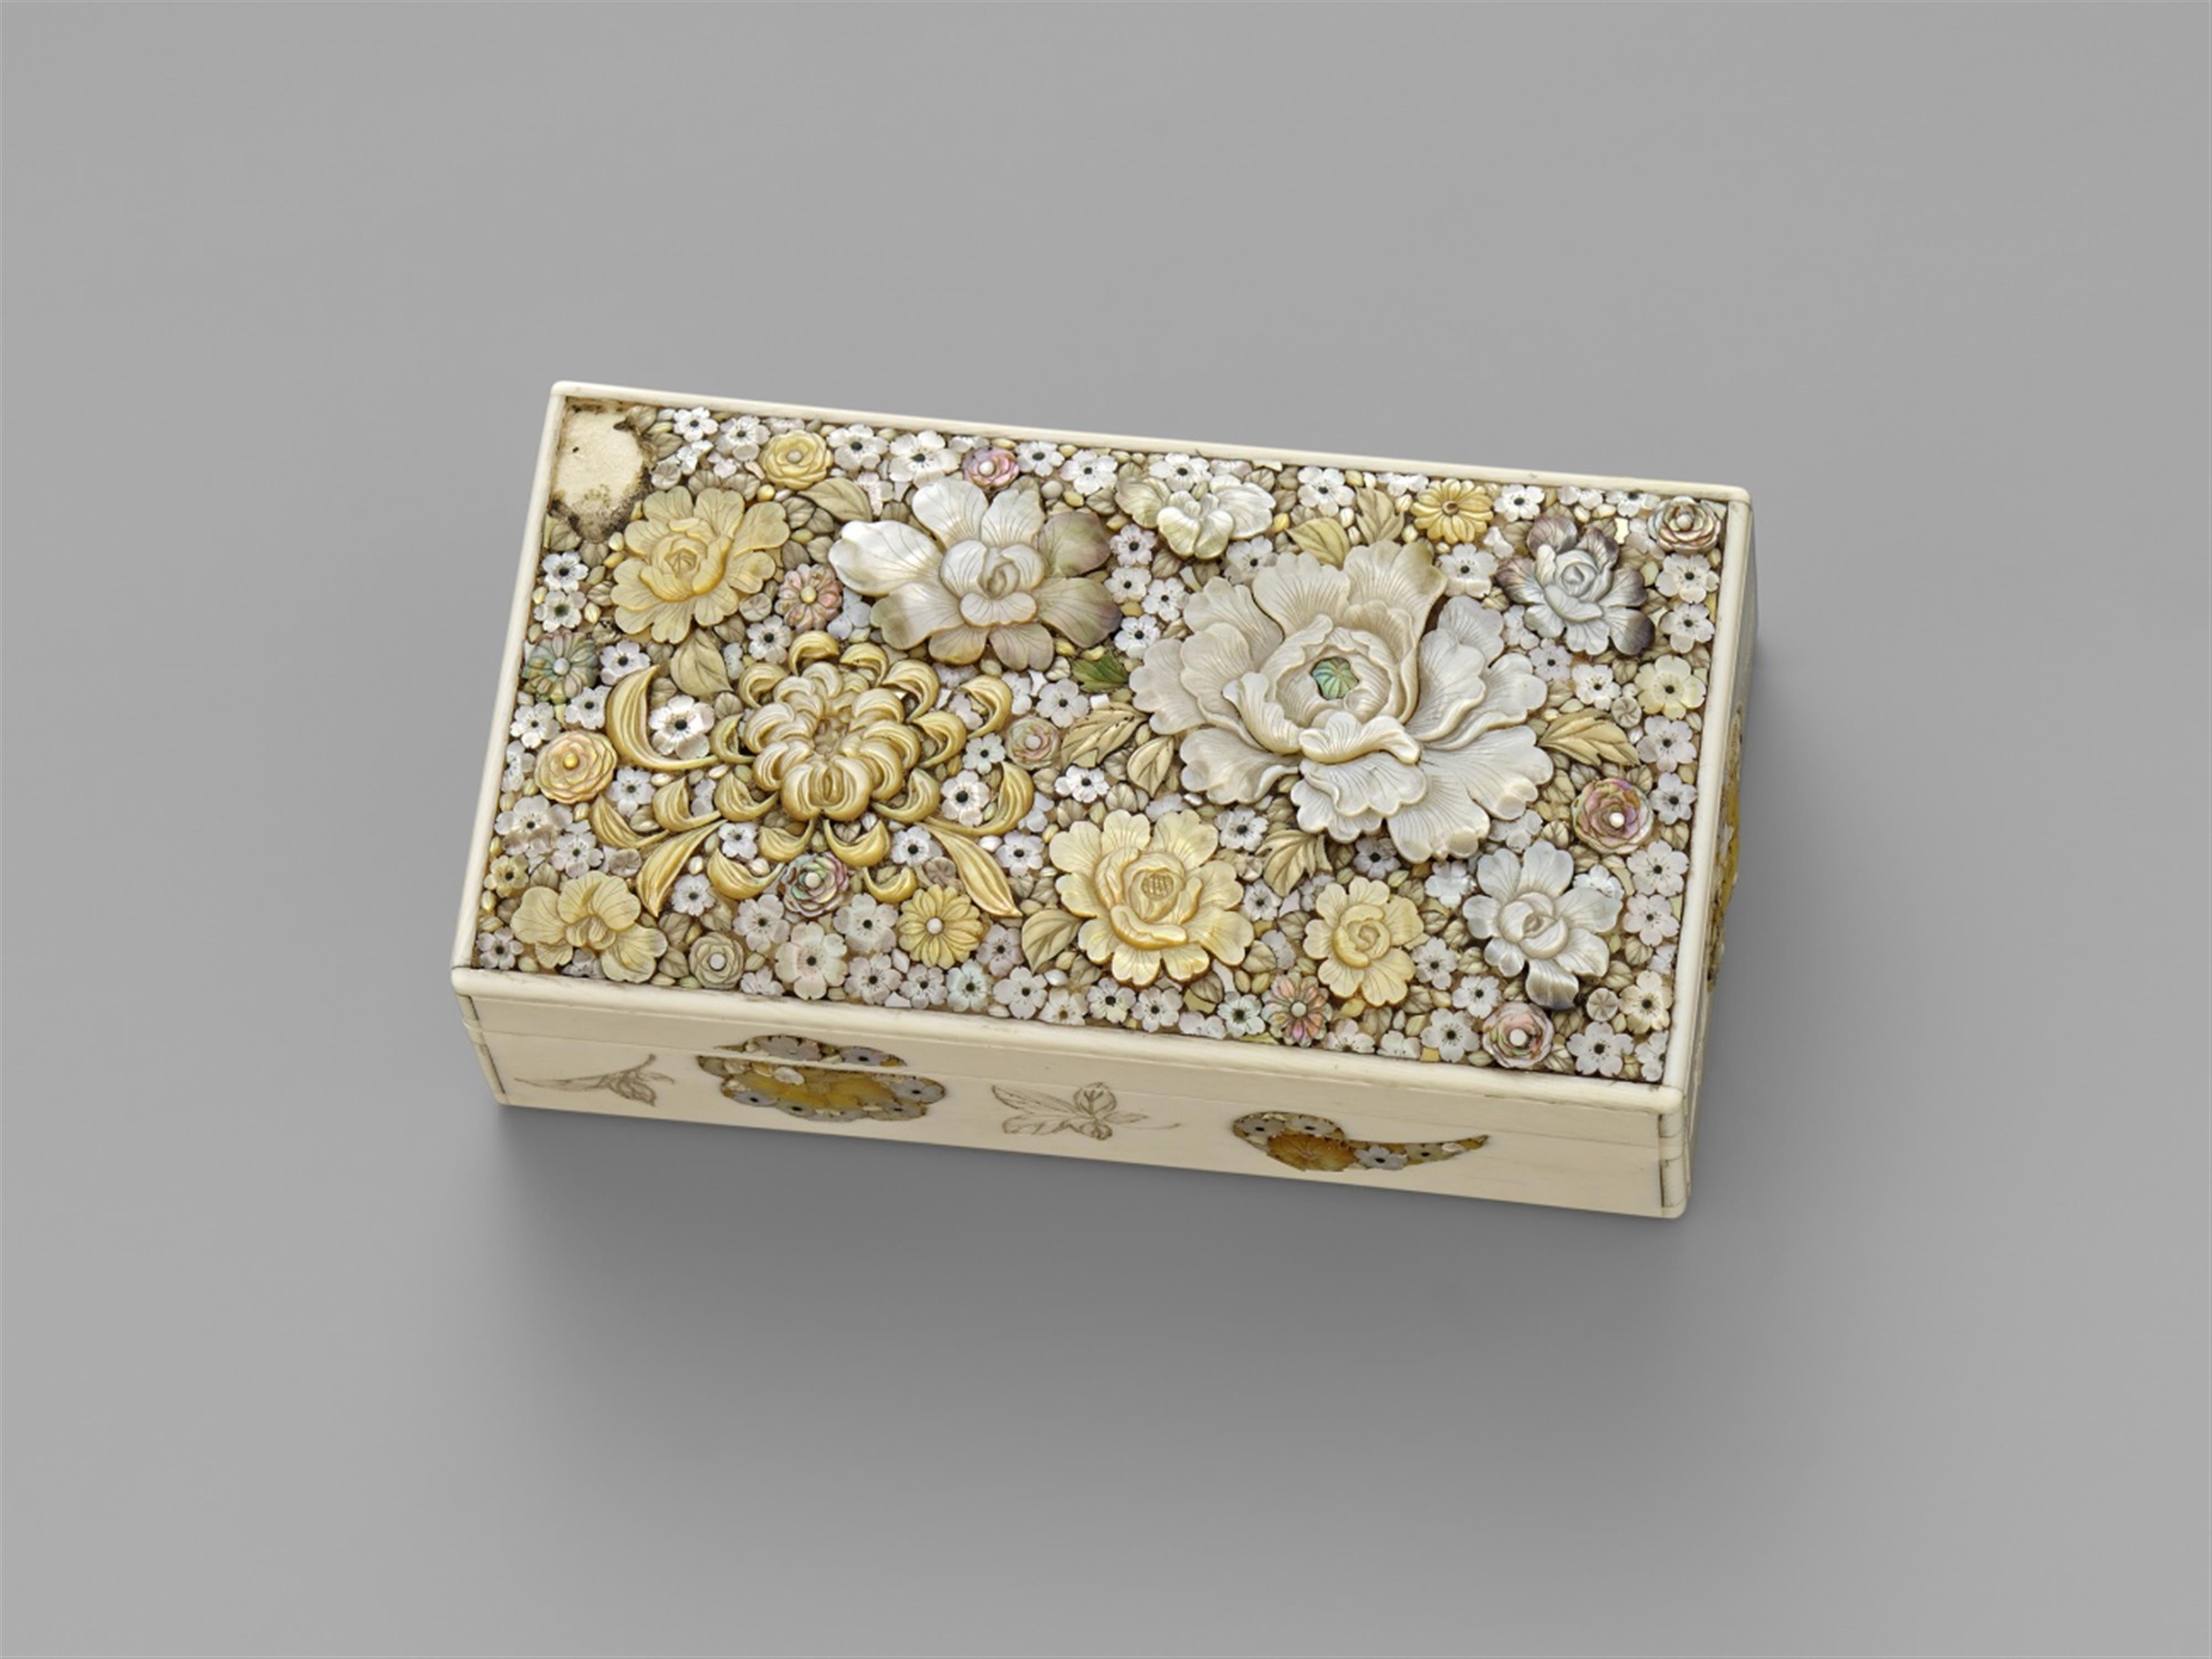 An ivory and mother-of-pearl Shibayama lidded box. Late 19th century - image-1